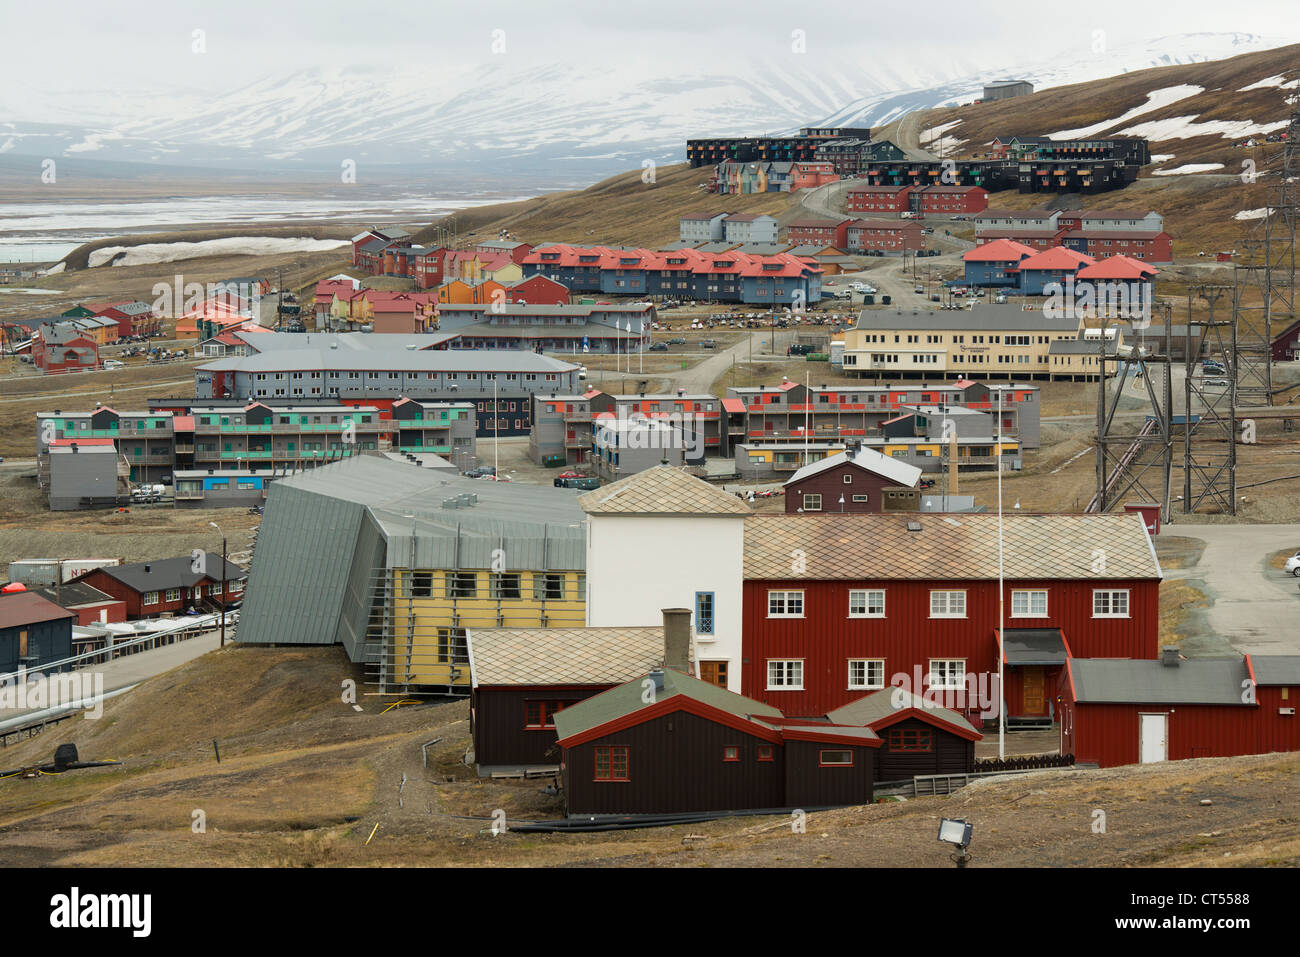 Norway, Svalbard, Longyearbyen, busy arctic town with long coal-mining history Stock Photo